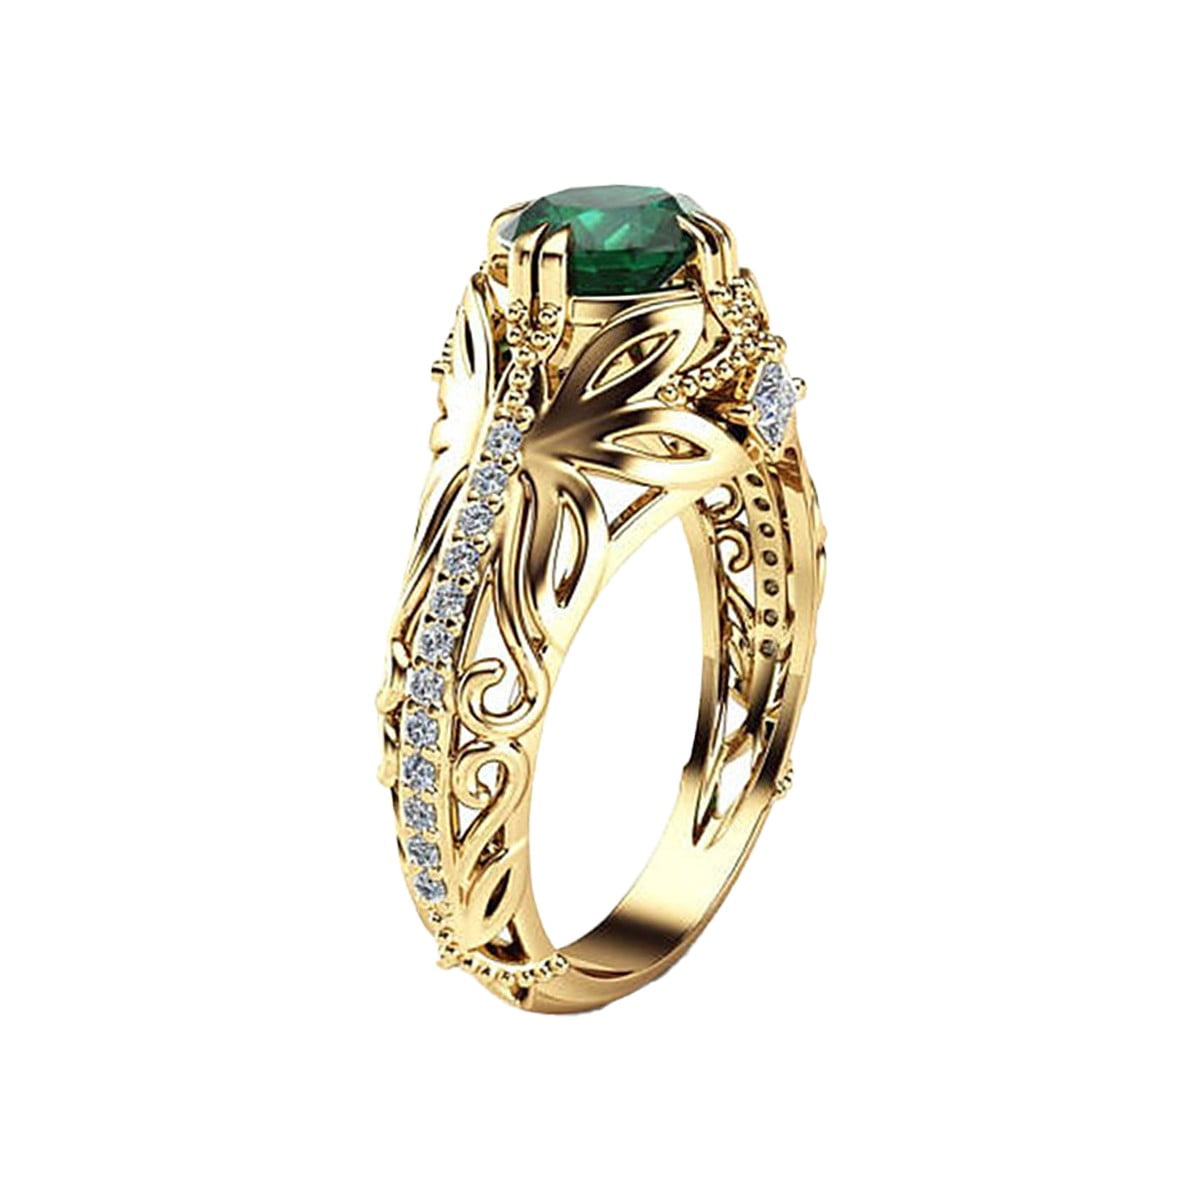 OUTA Green Zircon Ring Wedding Band Gold Green Stone Simulated Emerald Rings Luxury Rhinestone Jewelry Rings Birthstone Rings for Girls 